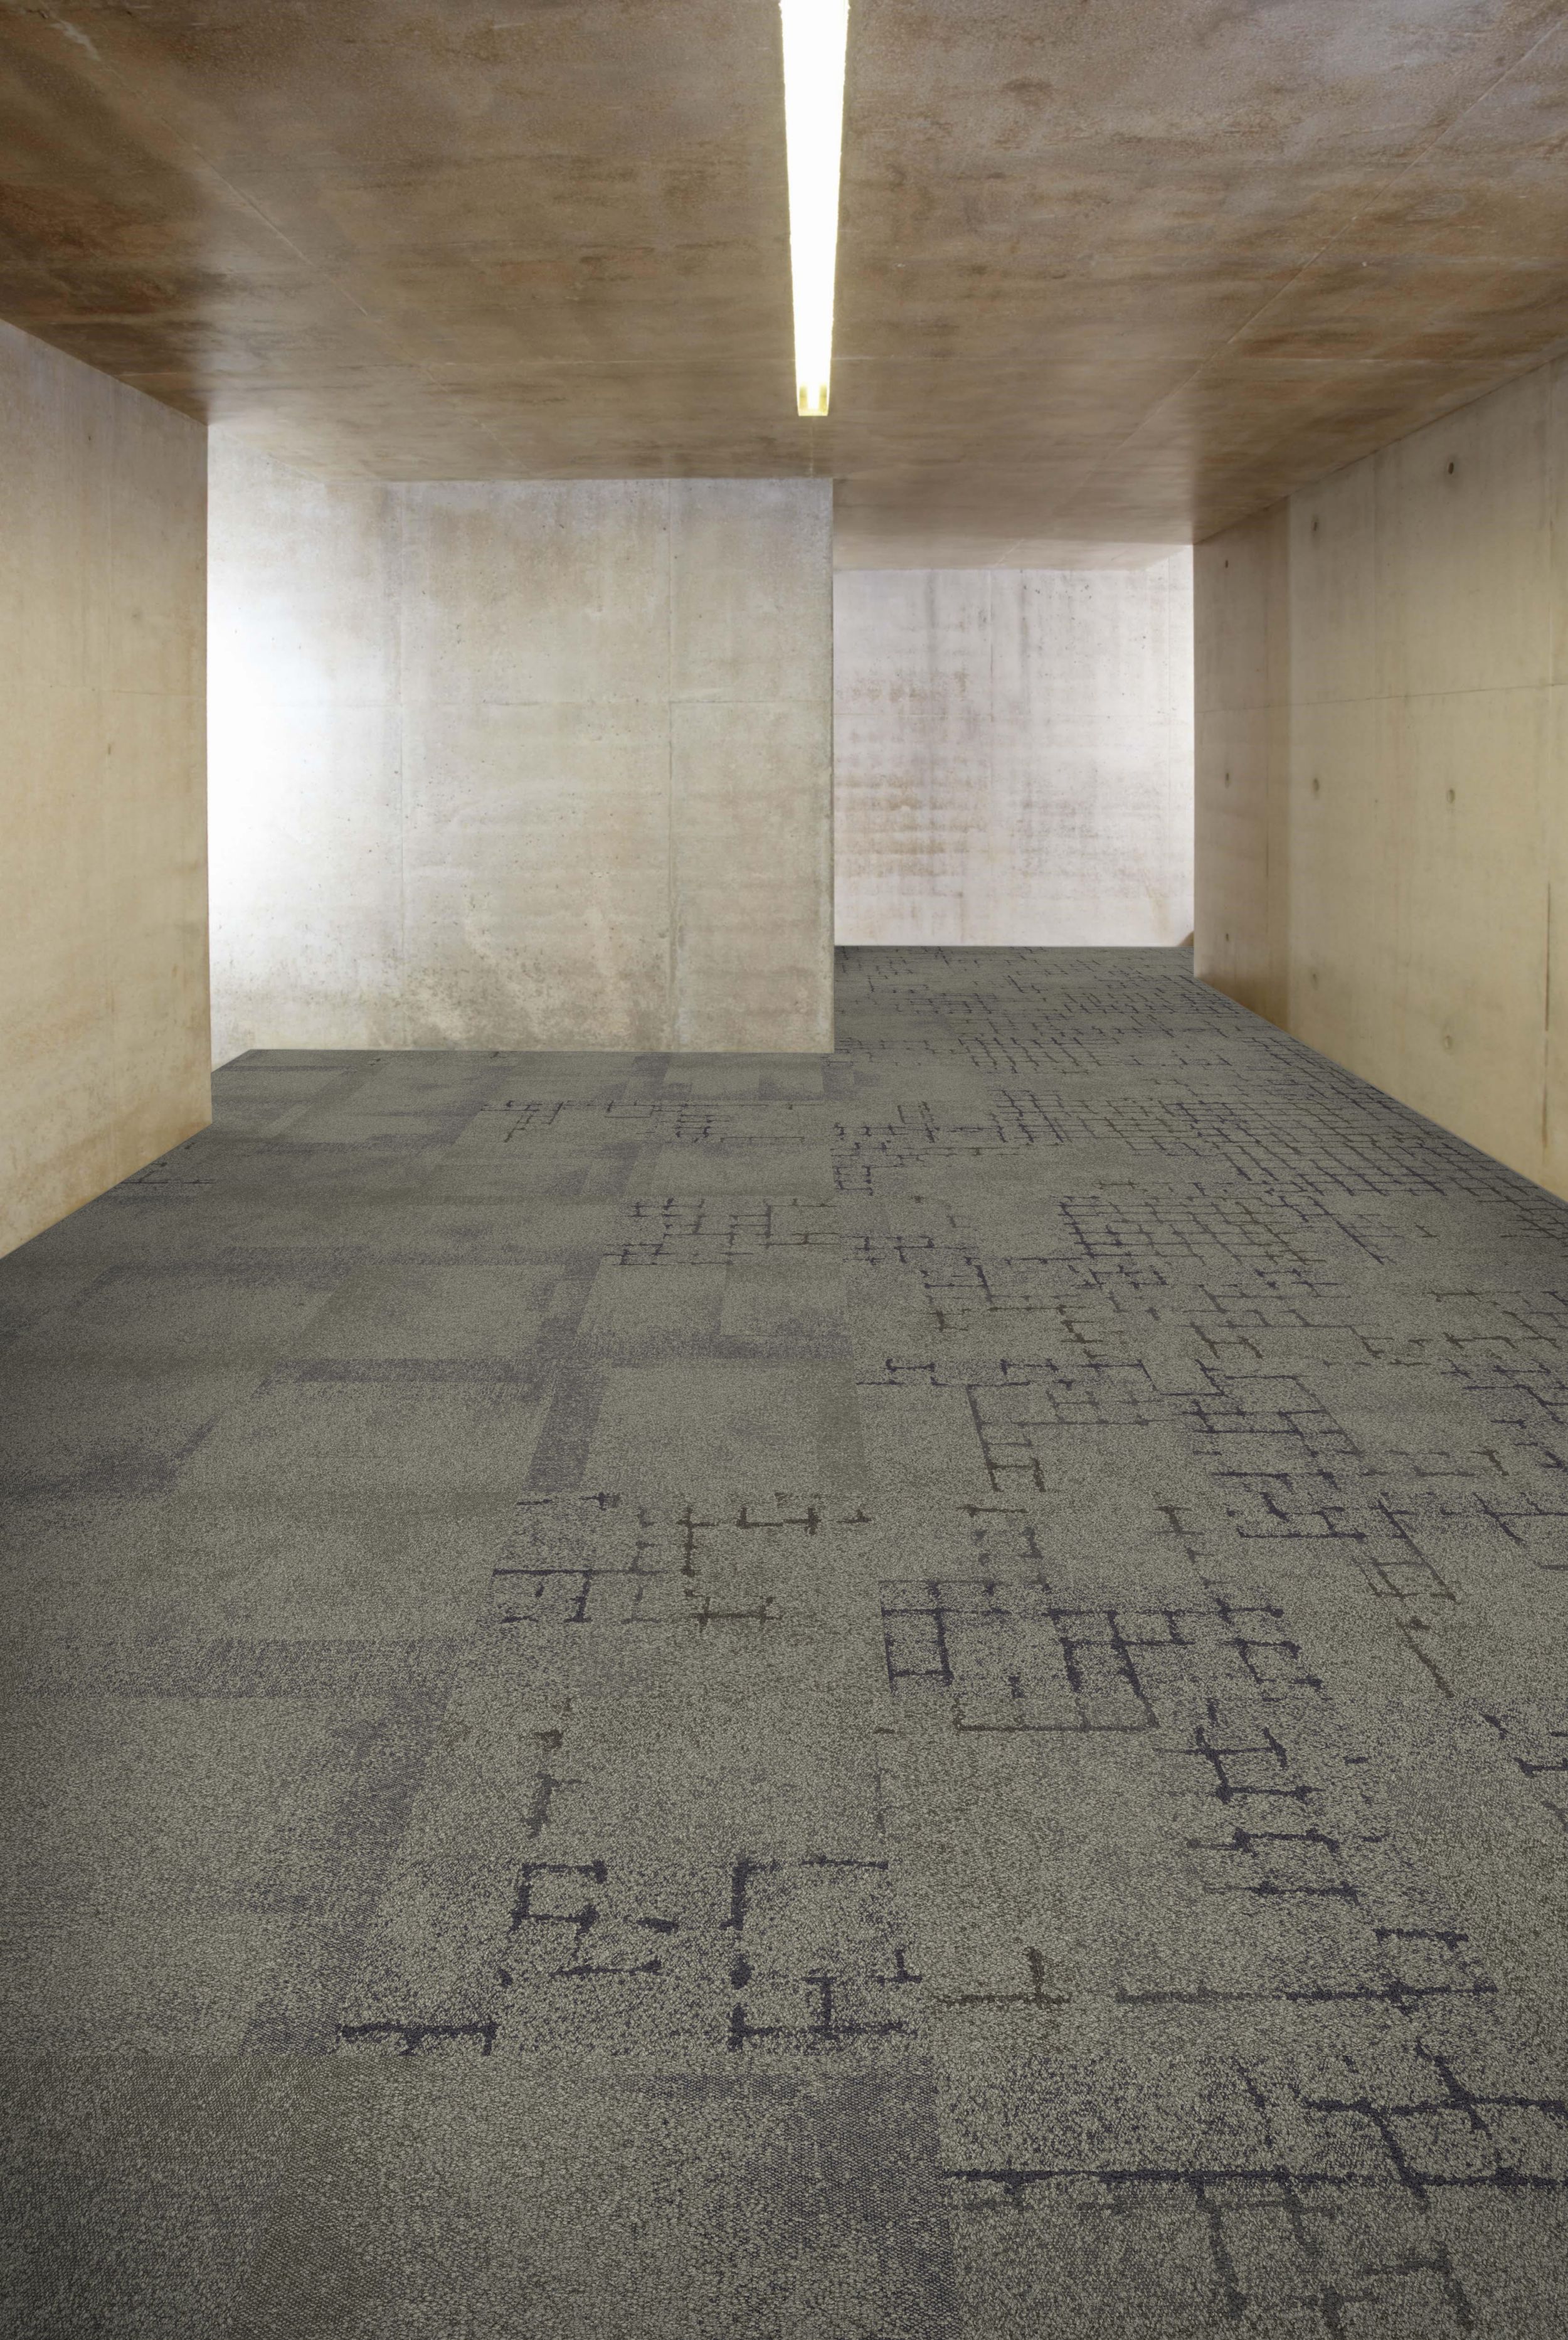 Interface Flagstone, Kerbstone and Sett in Stone carpet tile in corridor with concrete walls and ceiling afbeeldingnummer 2